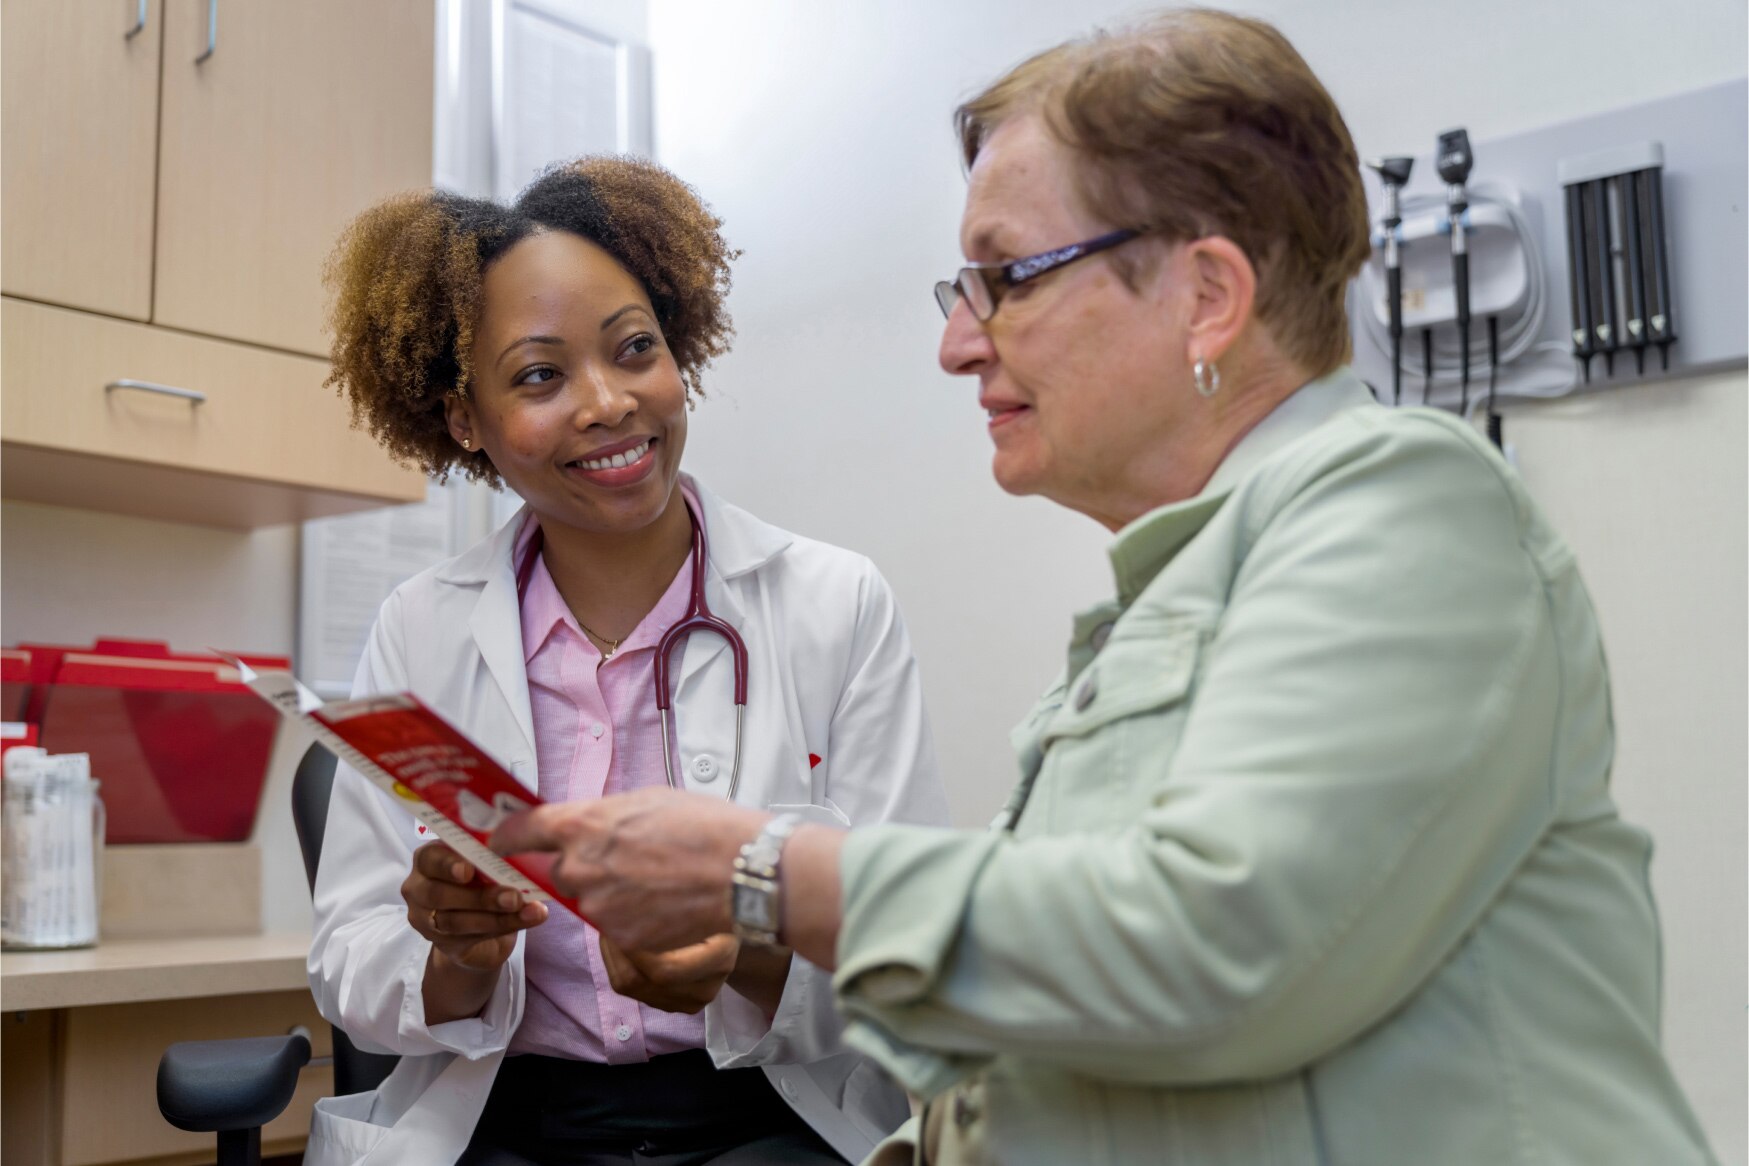 A MinuteClinic provider is helping educate her patient about diabetes.